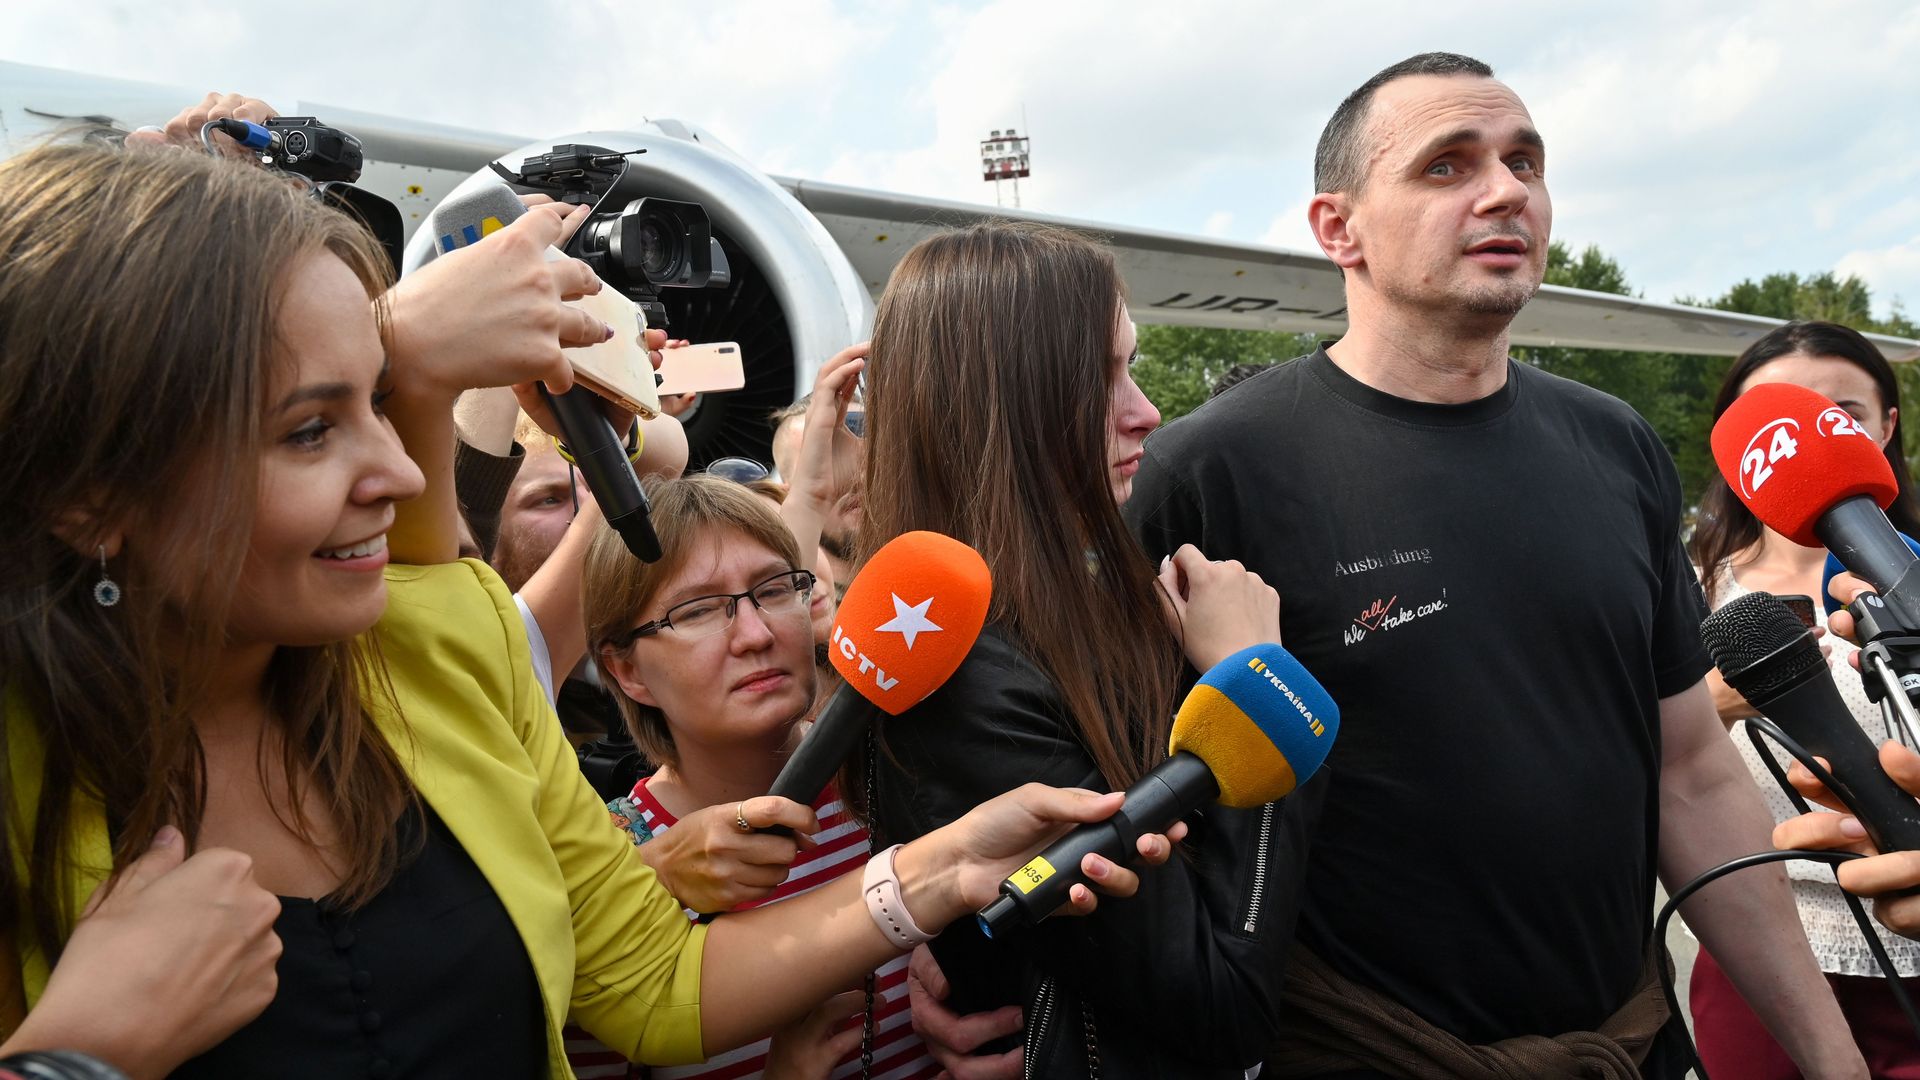 Ukrainian filmmaker and activist Oleg Sentsov chats with reporters after being released from Russia